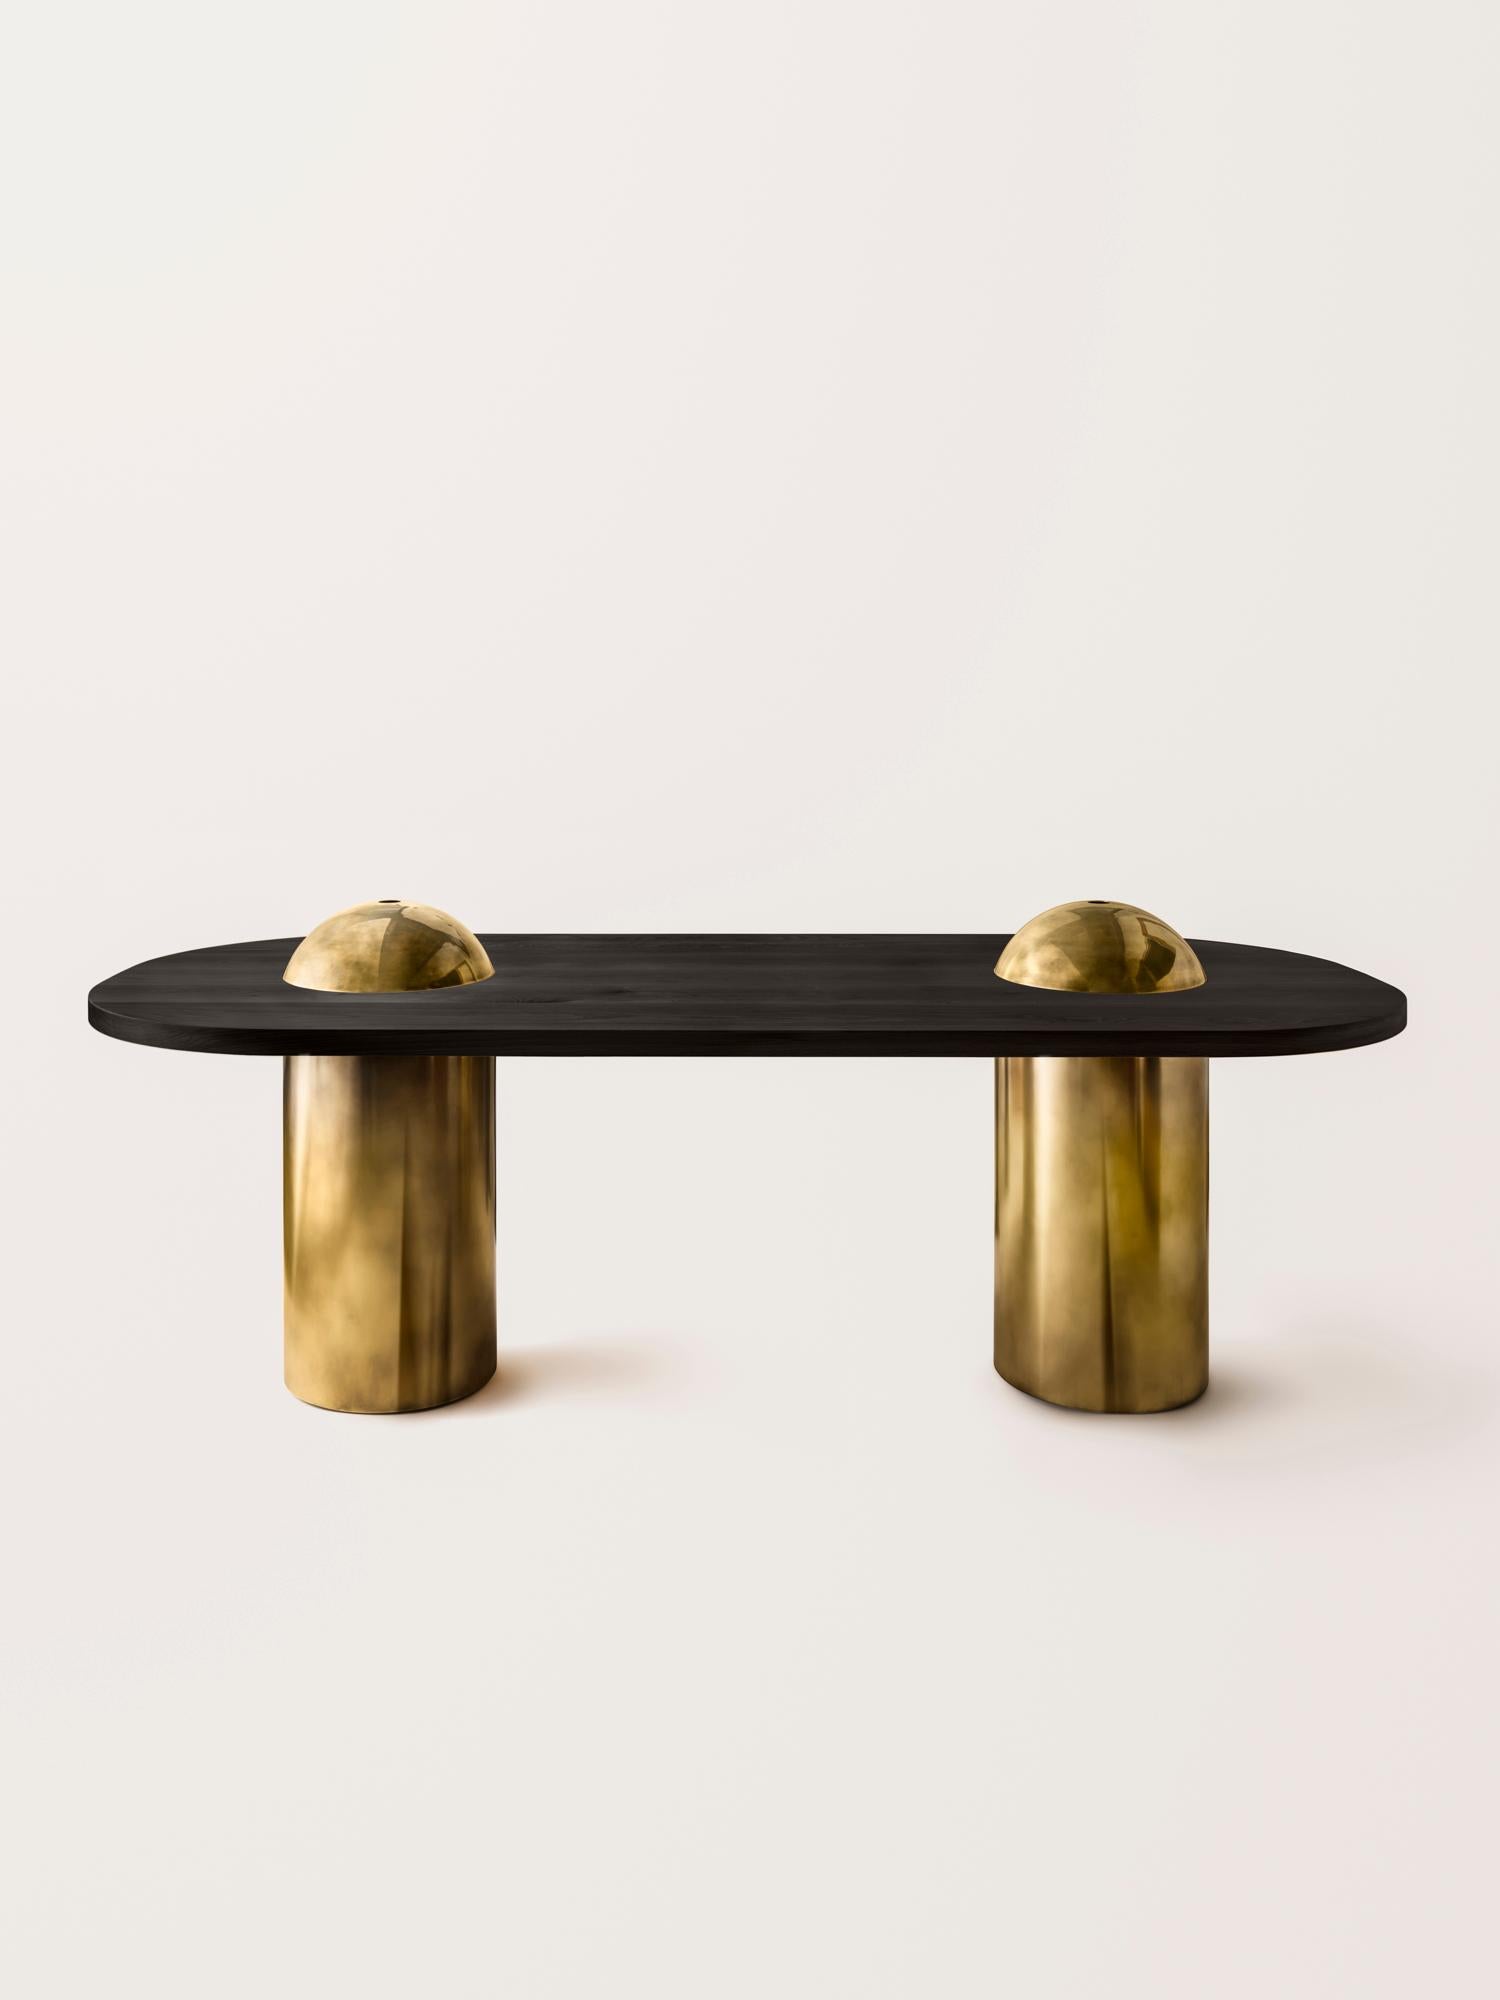 Silo Dining Table - Ebonized Walnut and Burnished Brass For Sale 5